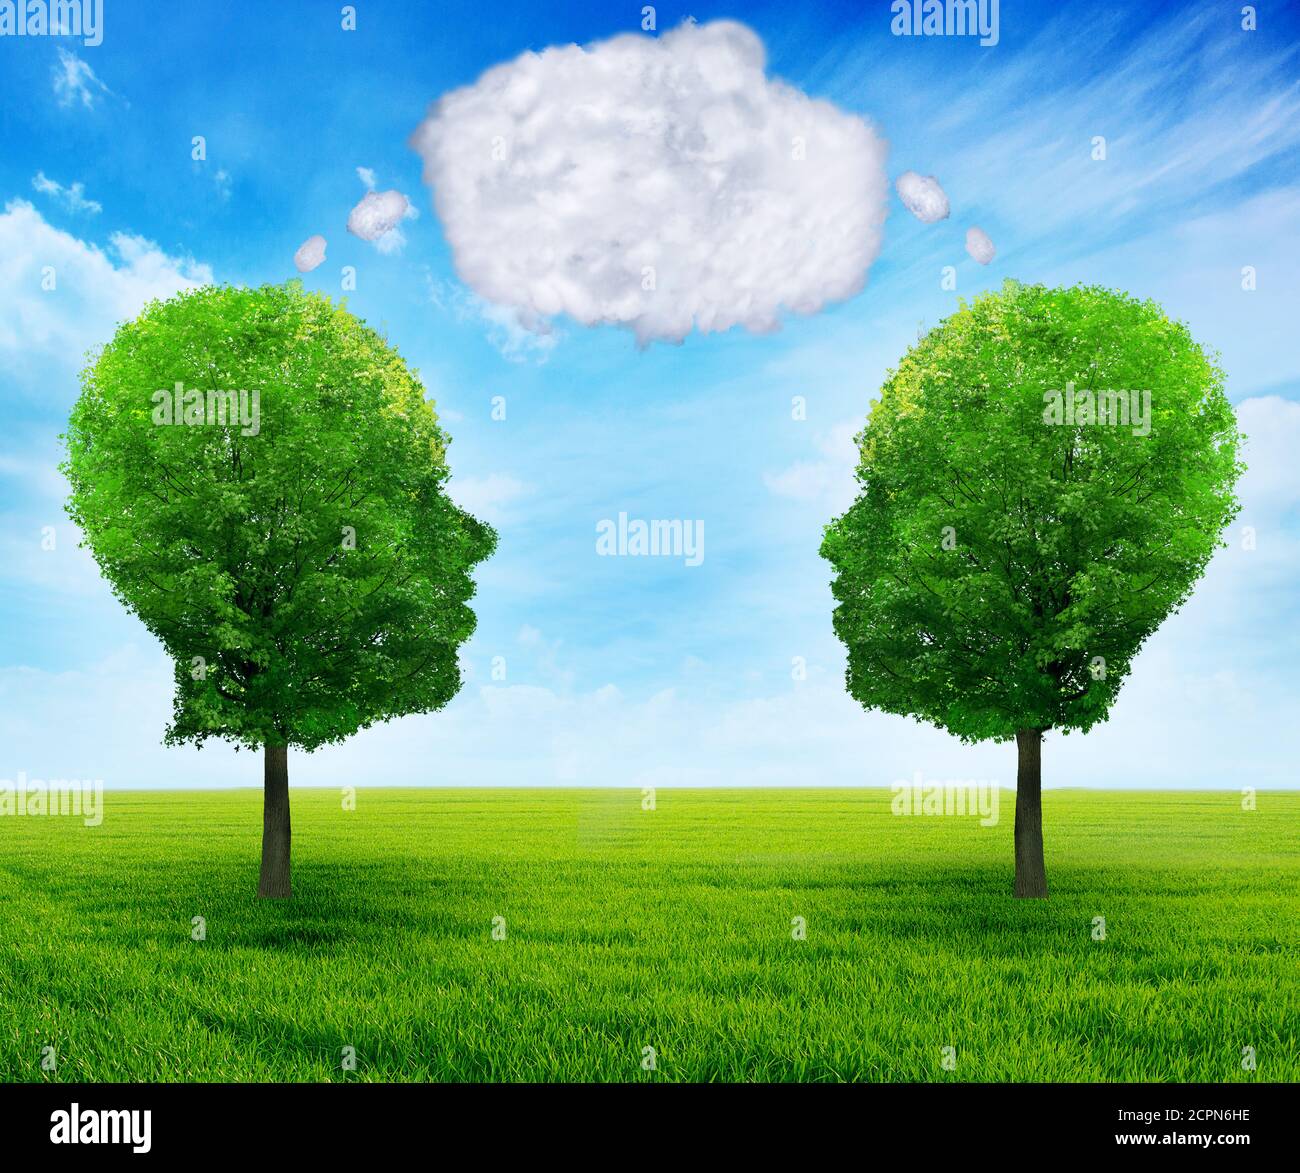 Growing network communication with group of two trees shaped as human head with blank word bubble made of clouds business concept of team growth sendi Stock Photo